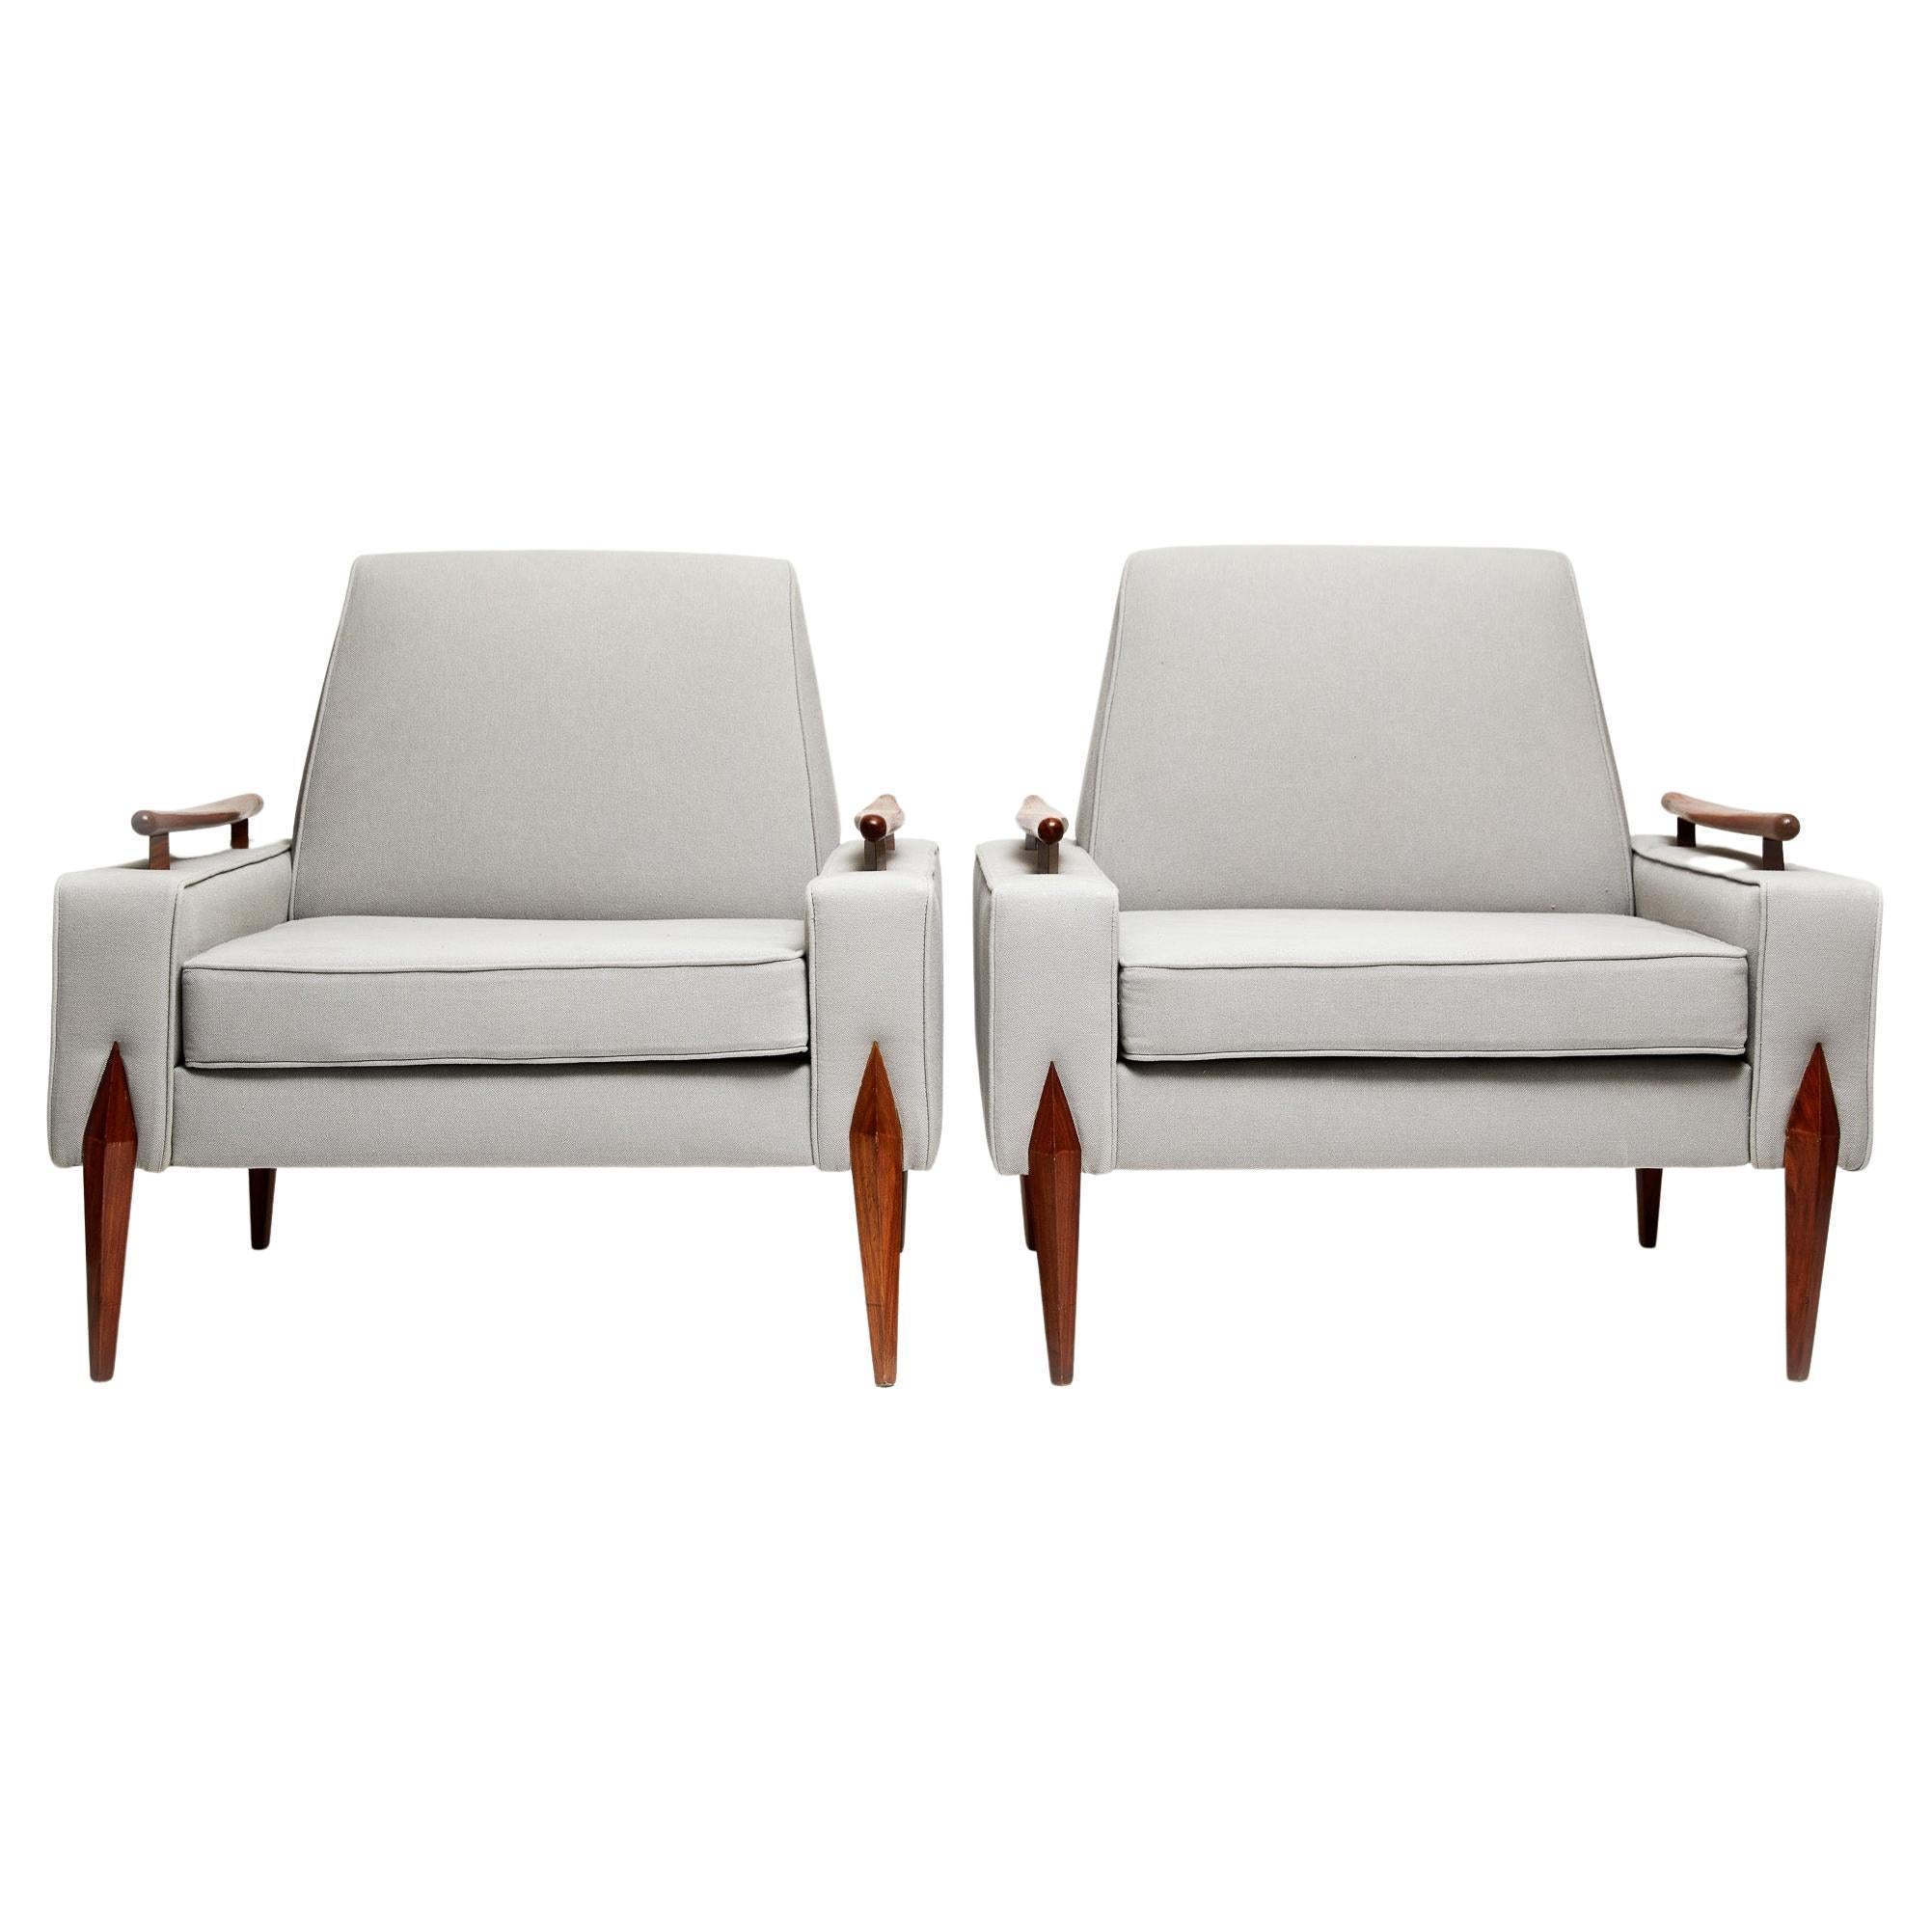 39. Brazilian Modern armchairs in Caviuna hardwood & Grey Linen, circa 1950s, Brazil 

Available today, these Brazilian Modern Armchairs in Caviuna Hardwood & Grey Linen, made in the 1950 are gorgeous! 

This wonderful pair consists of a